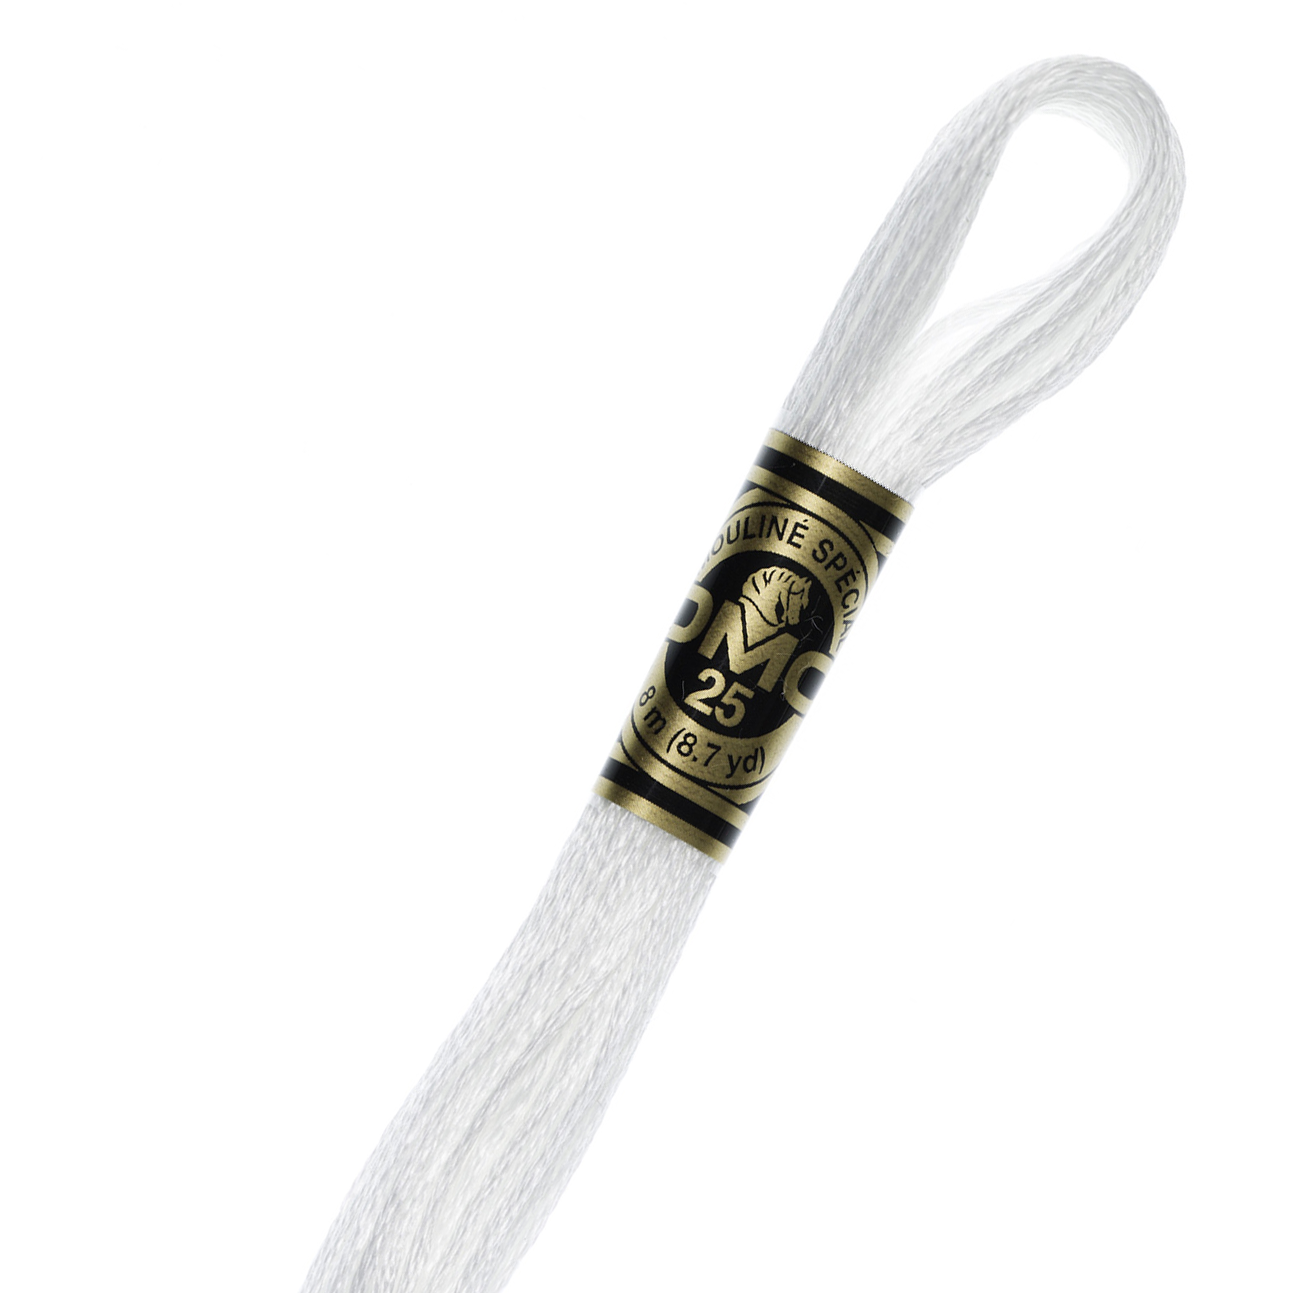 Anchor Embroidery Floss 1 Snow White - 719269002617